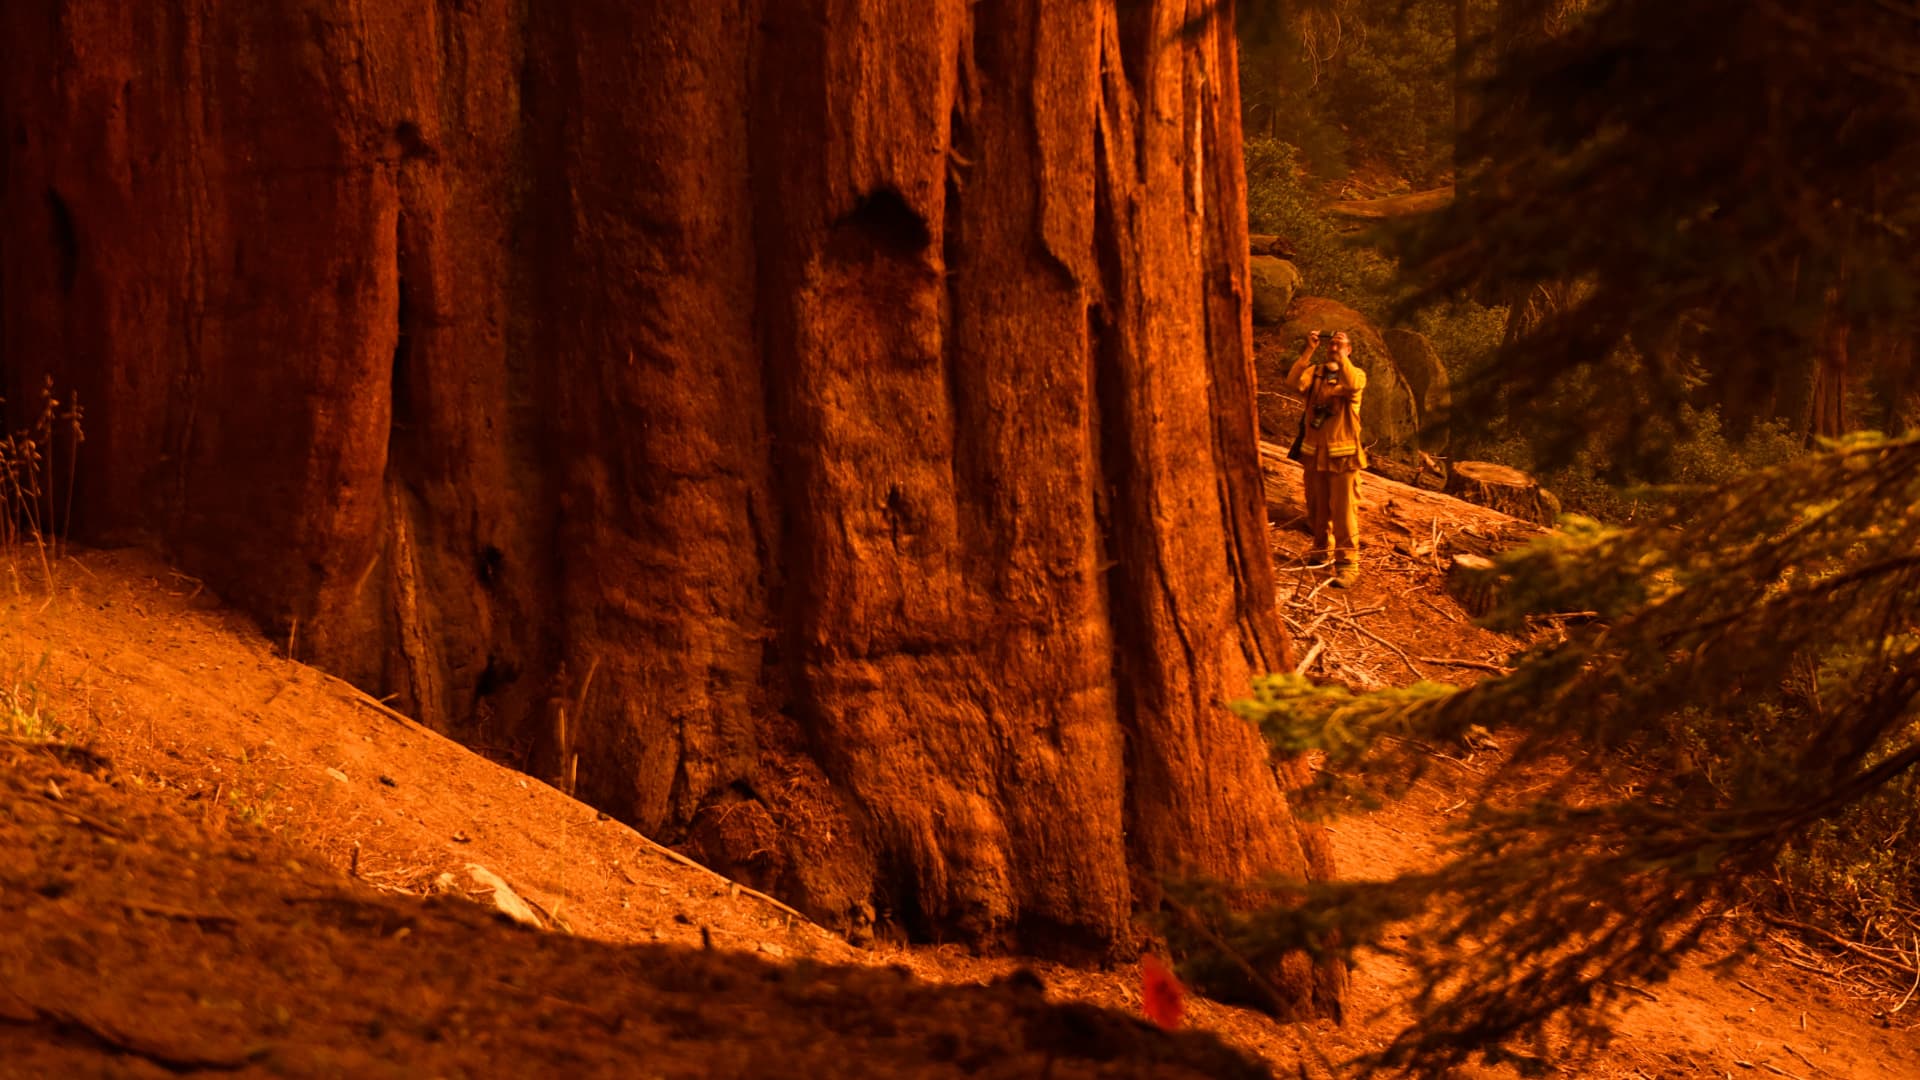 A photographer takes pictures at the base of giant sequoia trees in the Lost Grove along Generals Highway north of Red Fir during a media tour of the KNP Complex fire in the Sequoia National Park in California on Sept. 17, 2021.